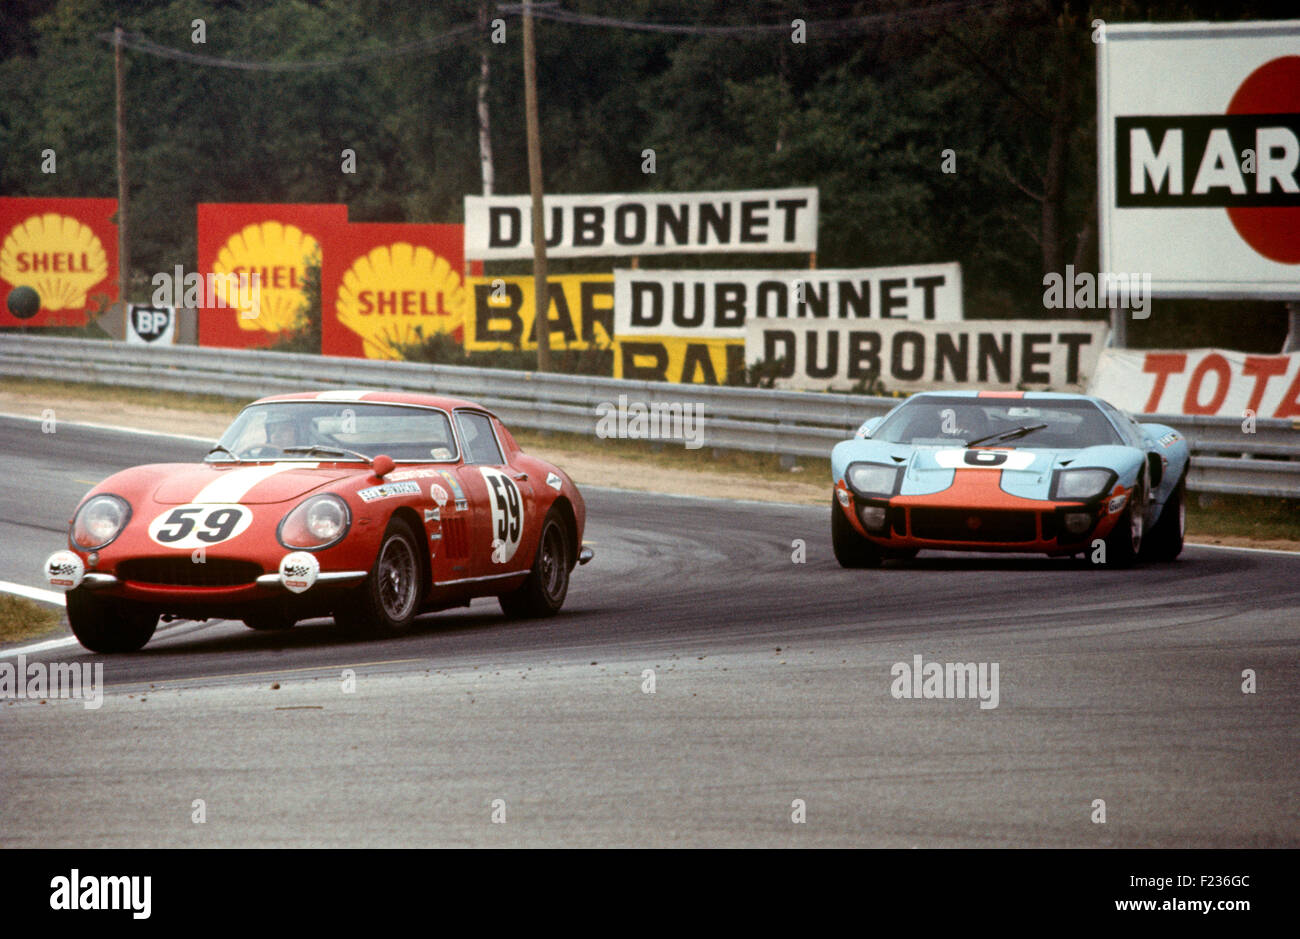 59 Jacques Rey Claude Haldi Ferrari 275 GTB, 6 Ford GT40  Gulf JW team car of Jacky Ickx and Jackie Oliver which won the race, at Mulsanne Corner 15th June 1969 Stock Photo